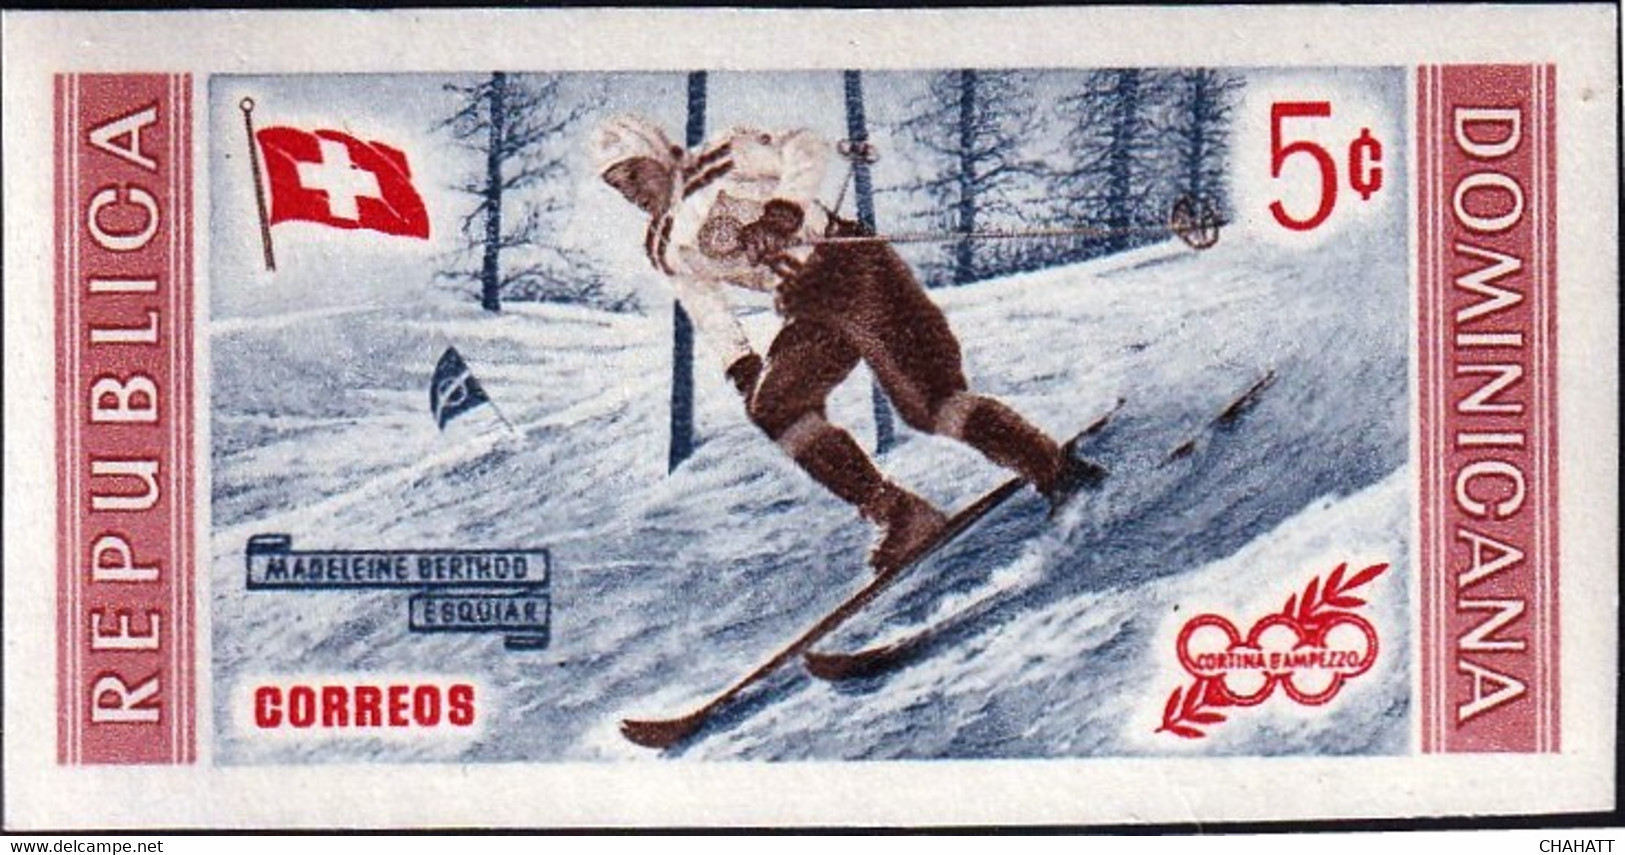 WINTER OLYMPICS-1956-SKIING-PERF & IMPERF-DOMINICANA-MNH-A4-535 - Invierno 1956: Cortina D'Ampezzo